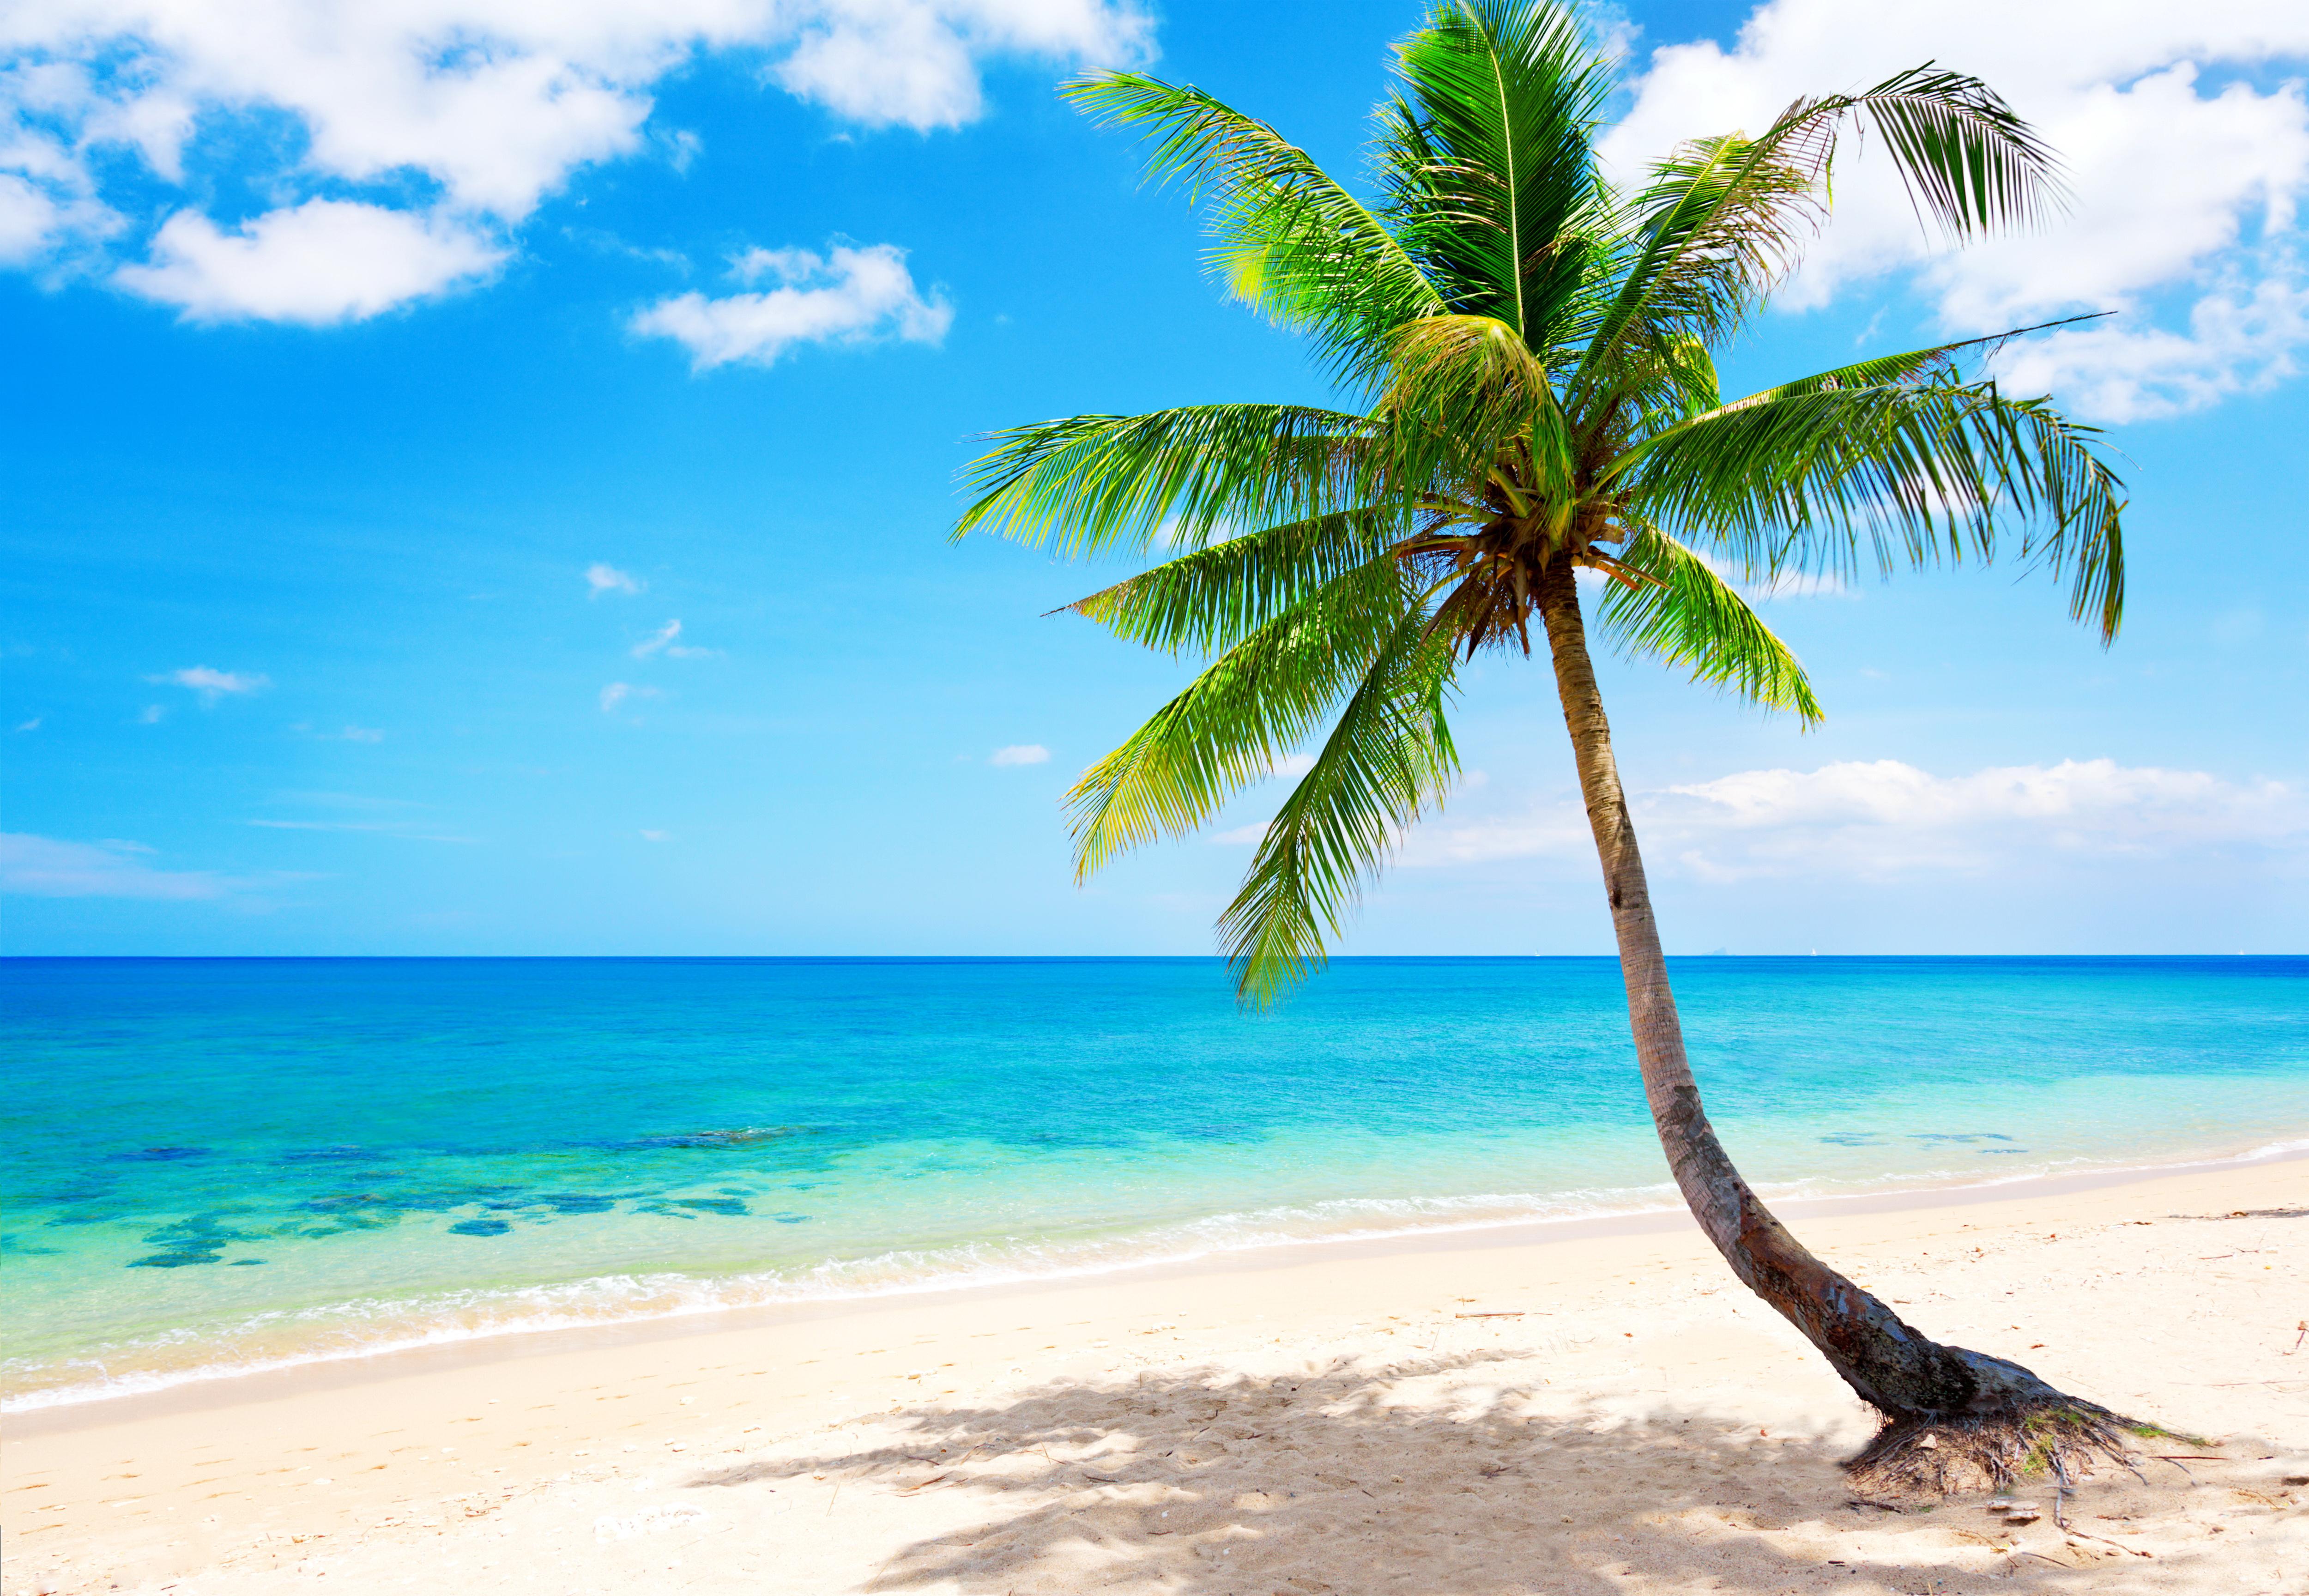 Tropical Beach Wallpaper Pictures Image